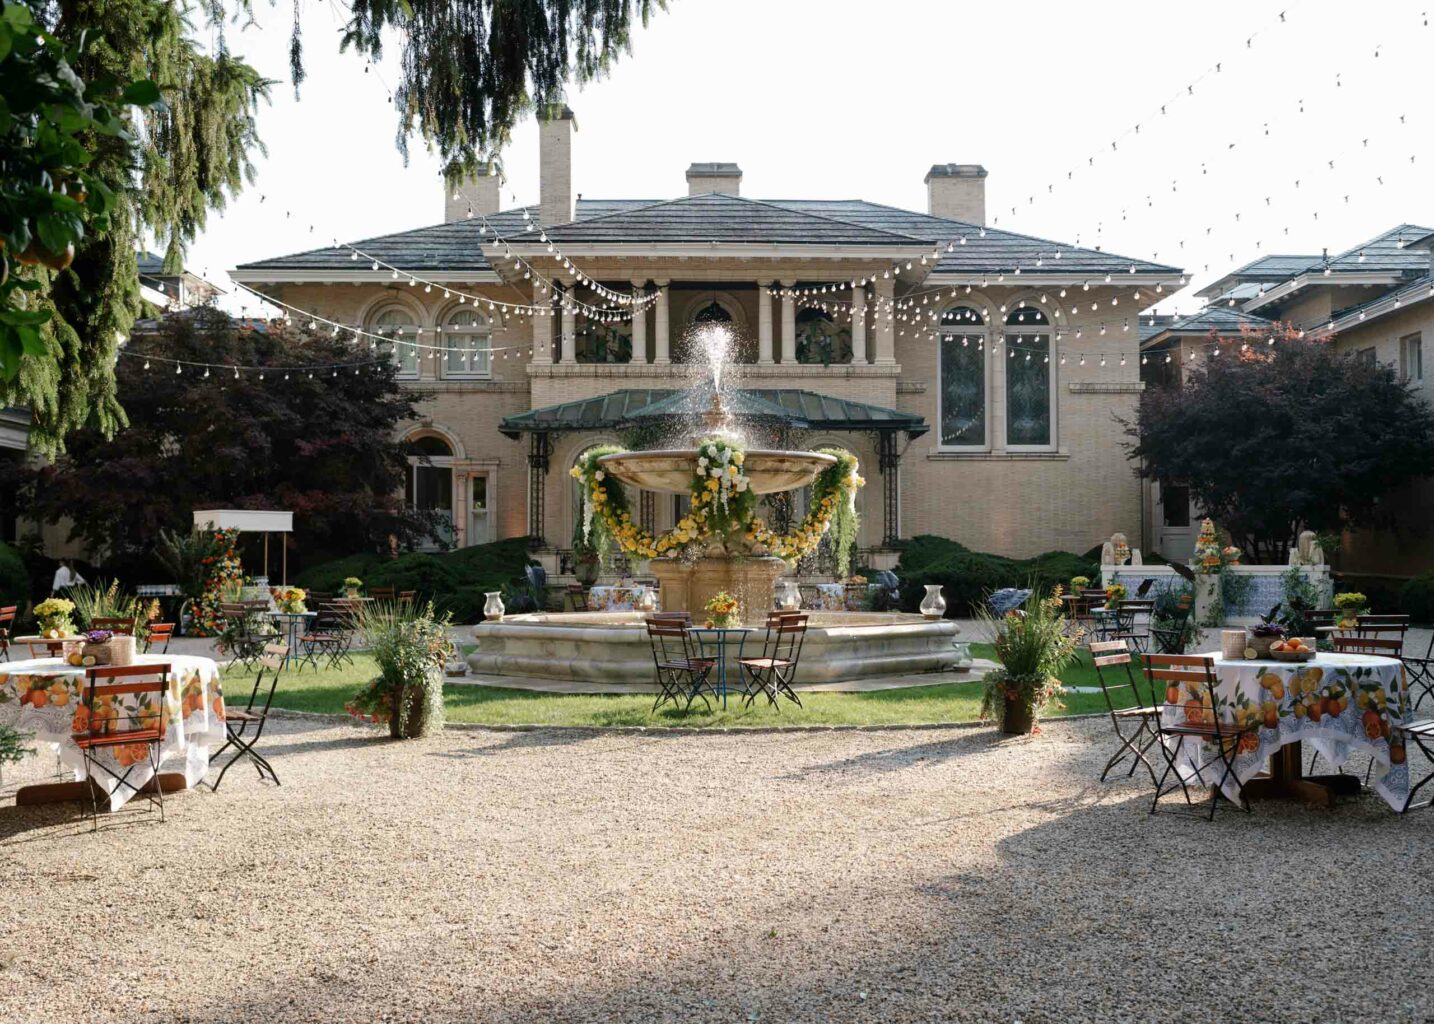 fountain surrounded by tables in front of an estate house.